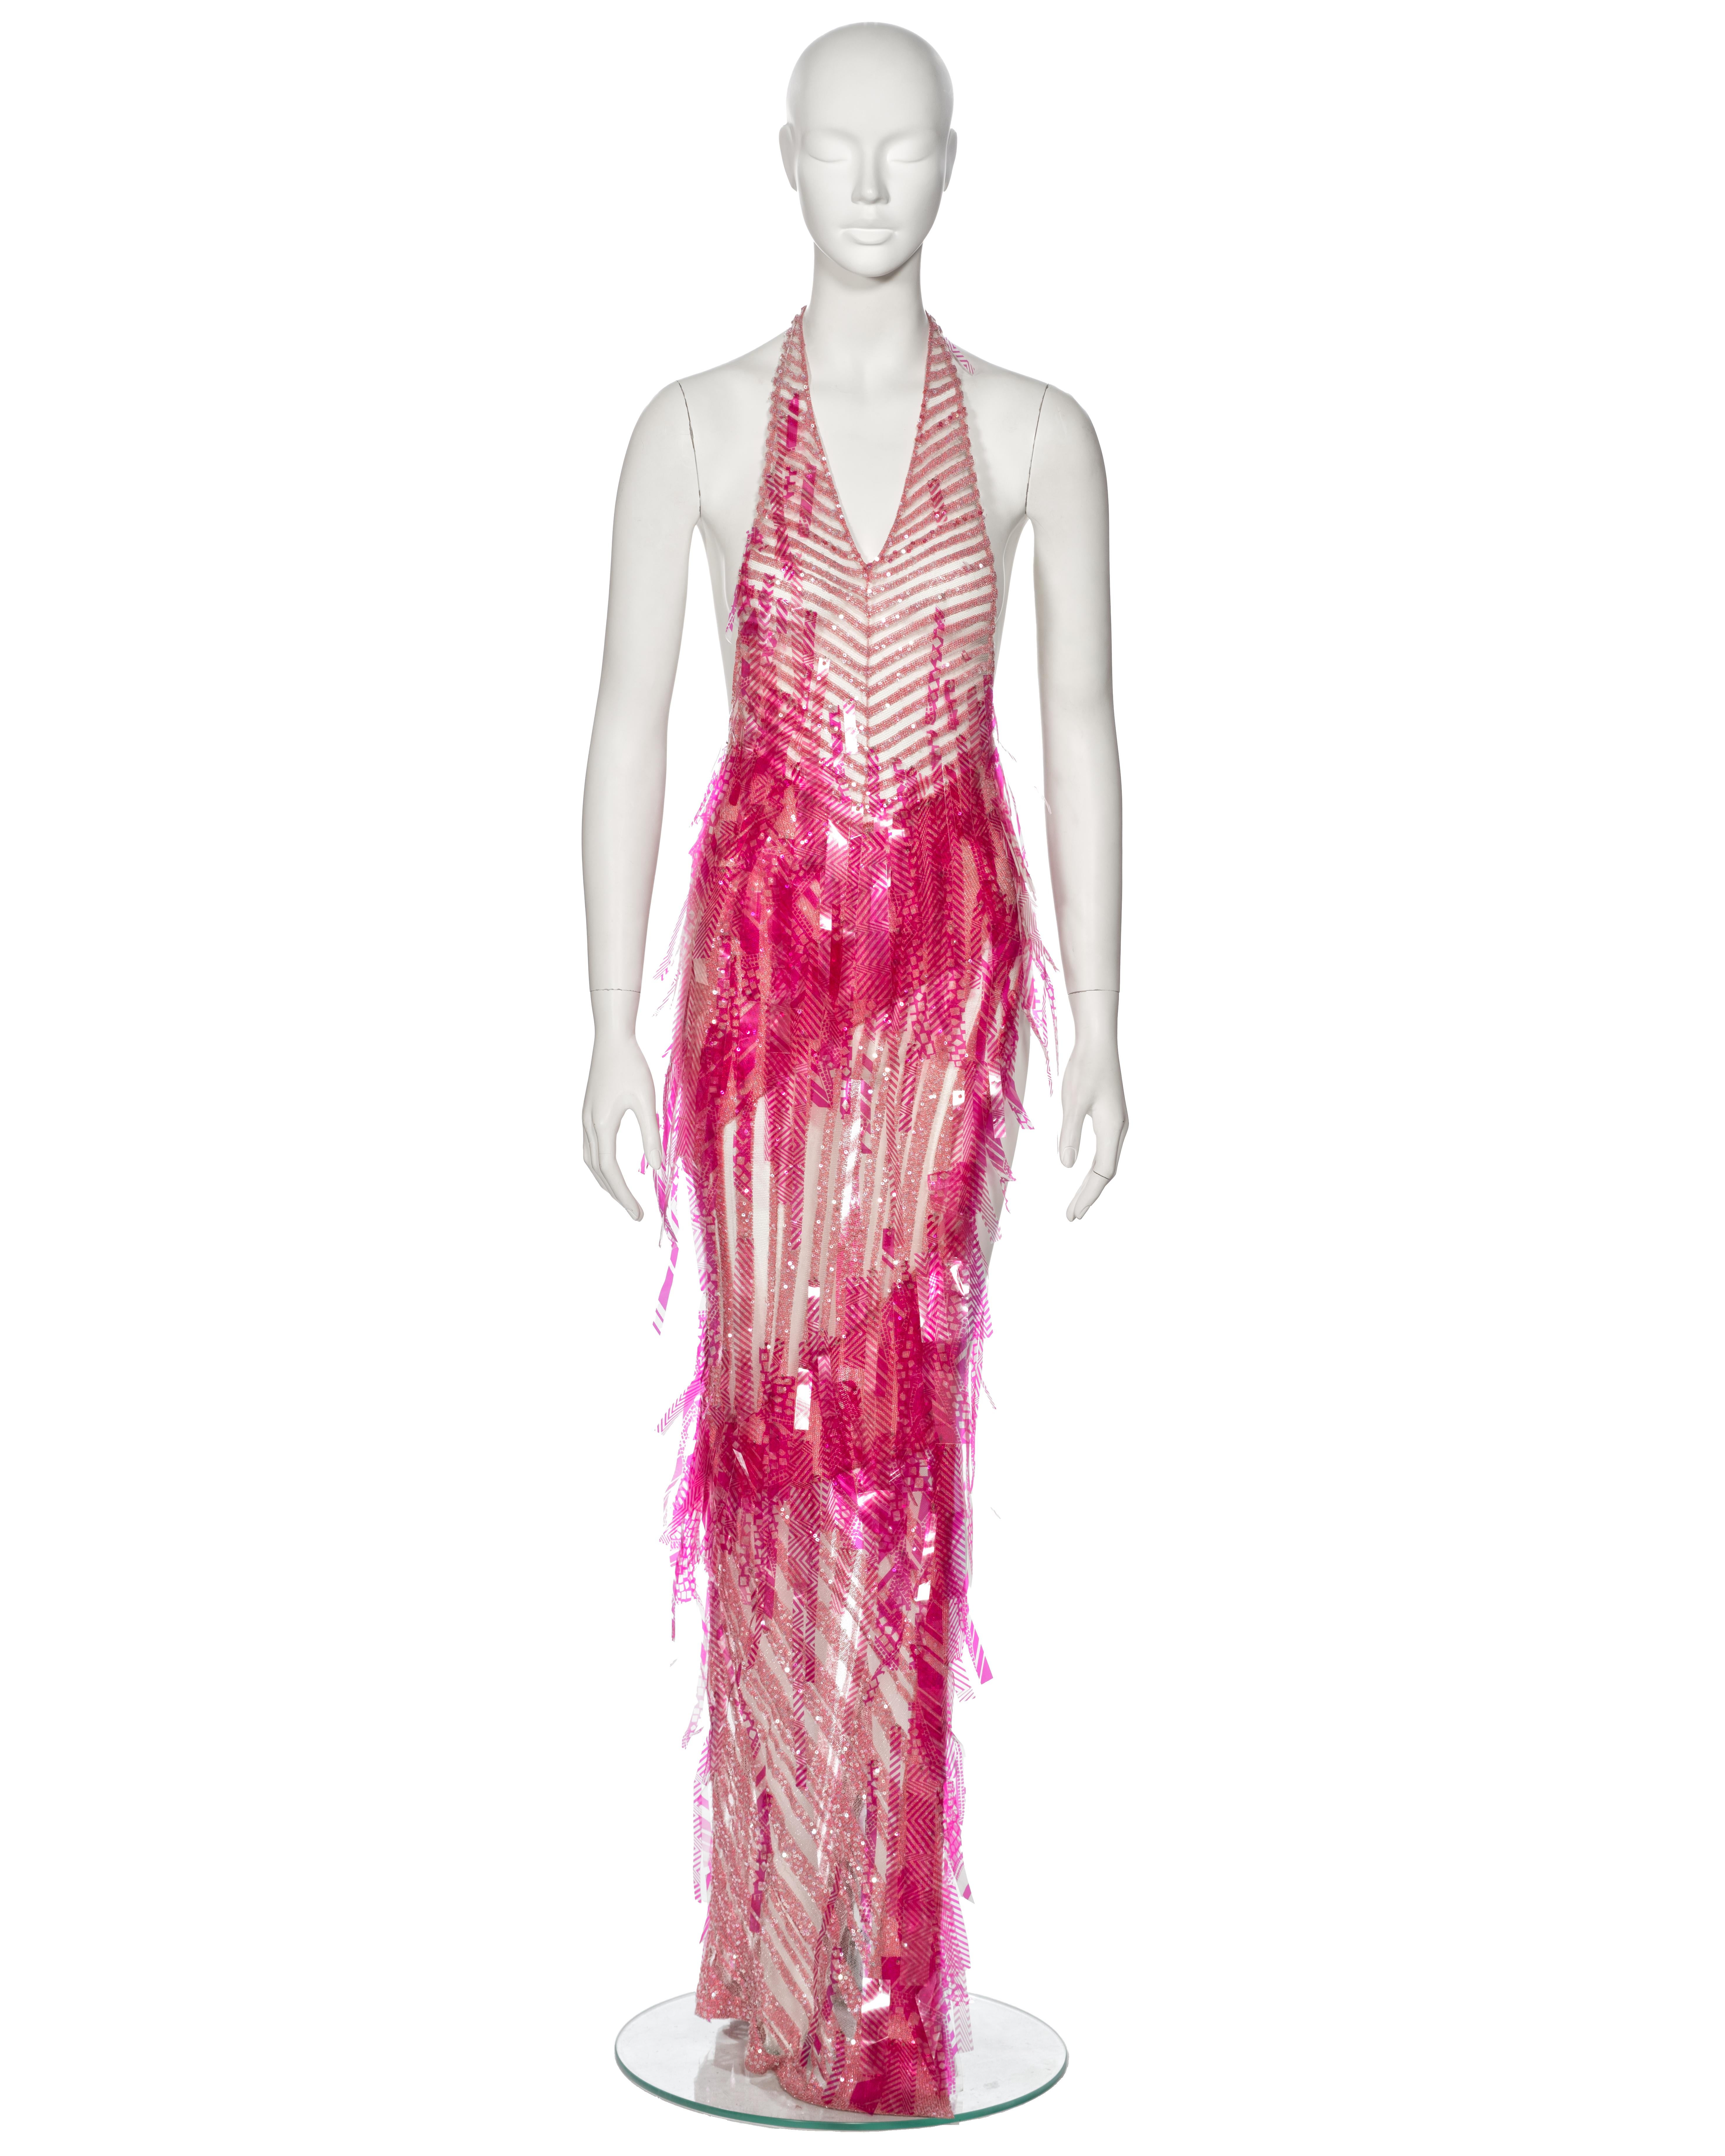 ▪ Rare Runway Julien MacDonald Knitted Evening Dress
▪ Spring-Summer 2002
▪ Sold by One of a Kind Archive
▪ Striped knit composition in pink with clear yarn accents
▪ Adorned with printed plastic strips and sparkling clear sequin details
▪